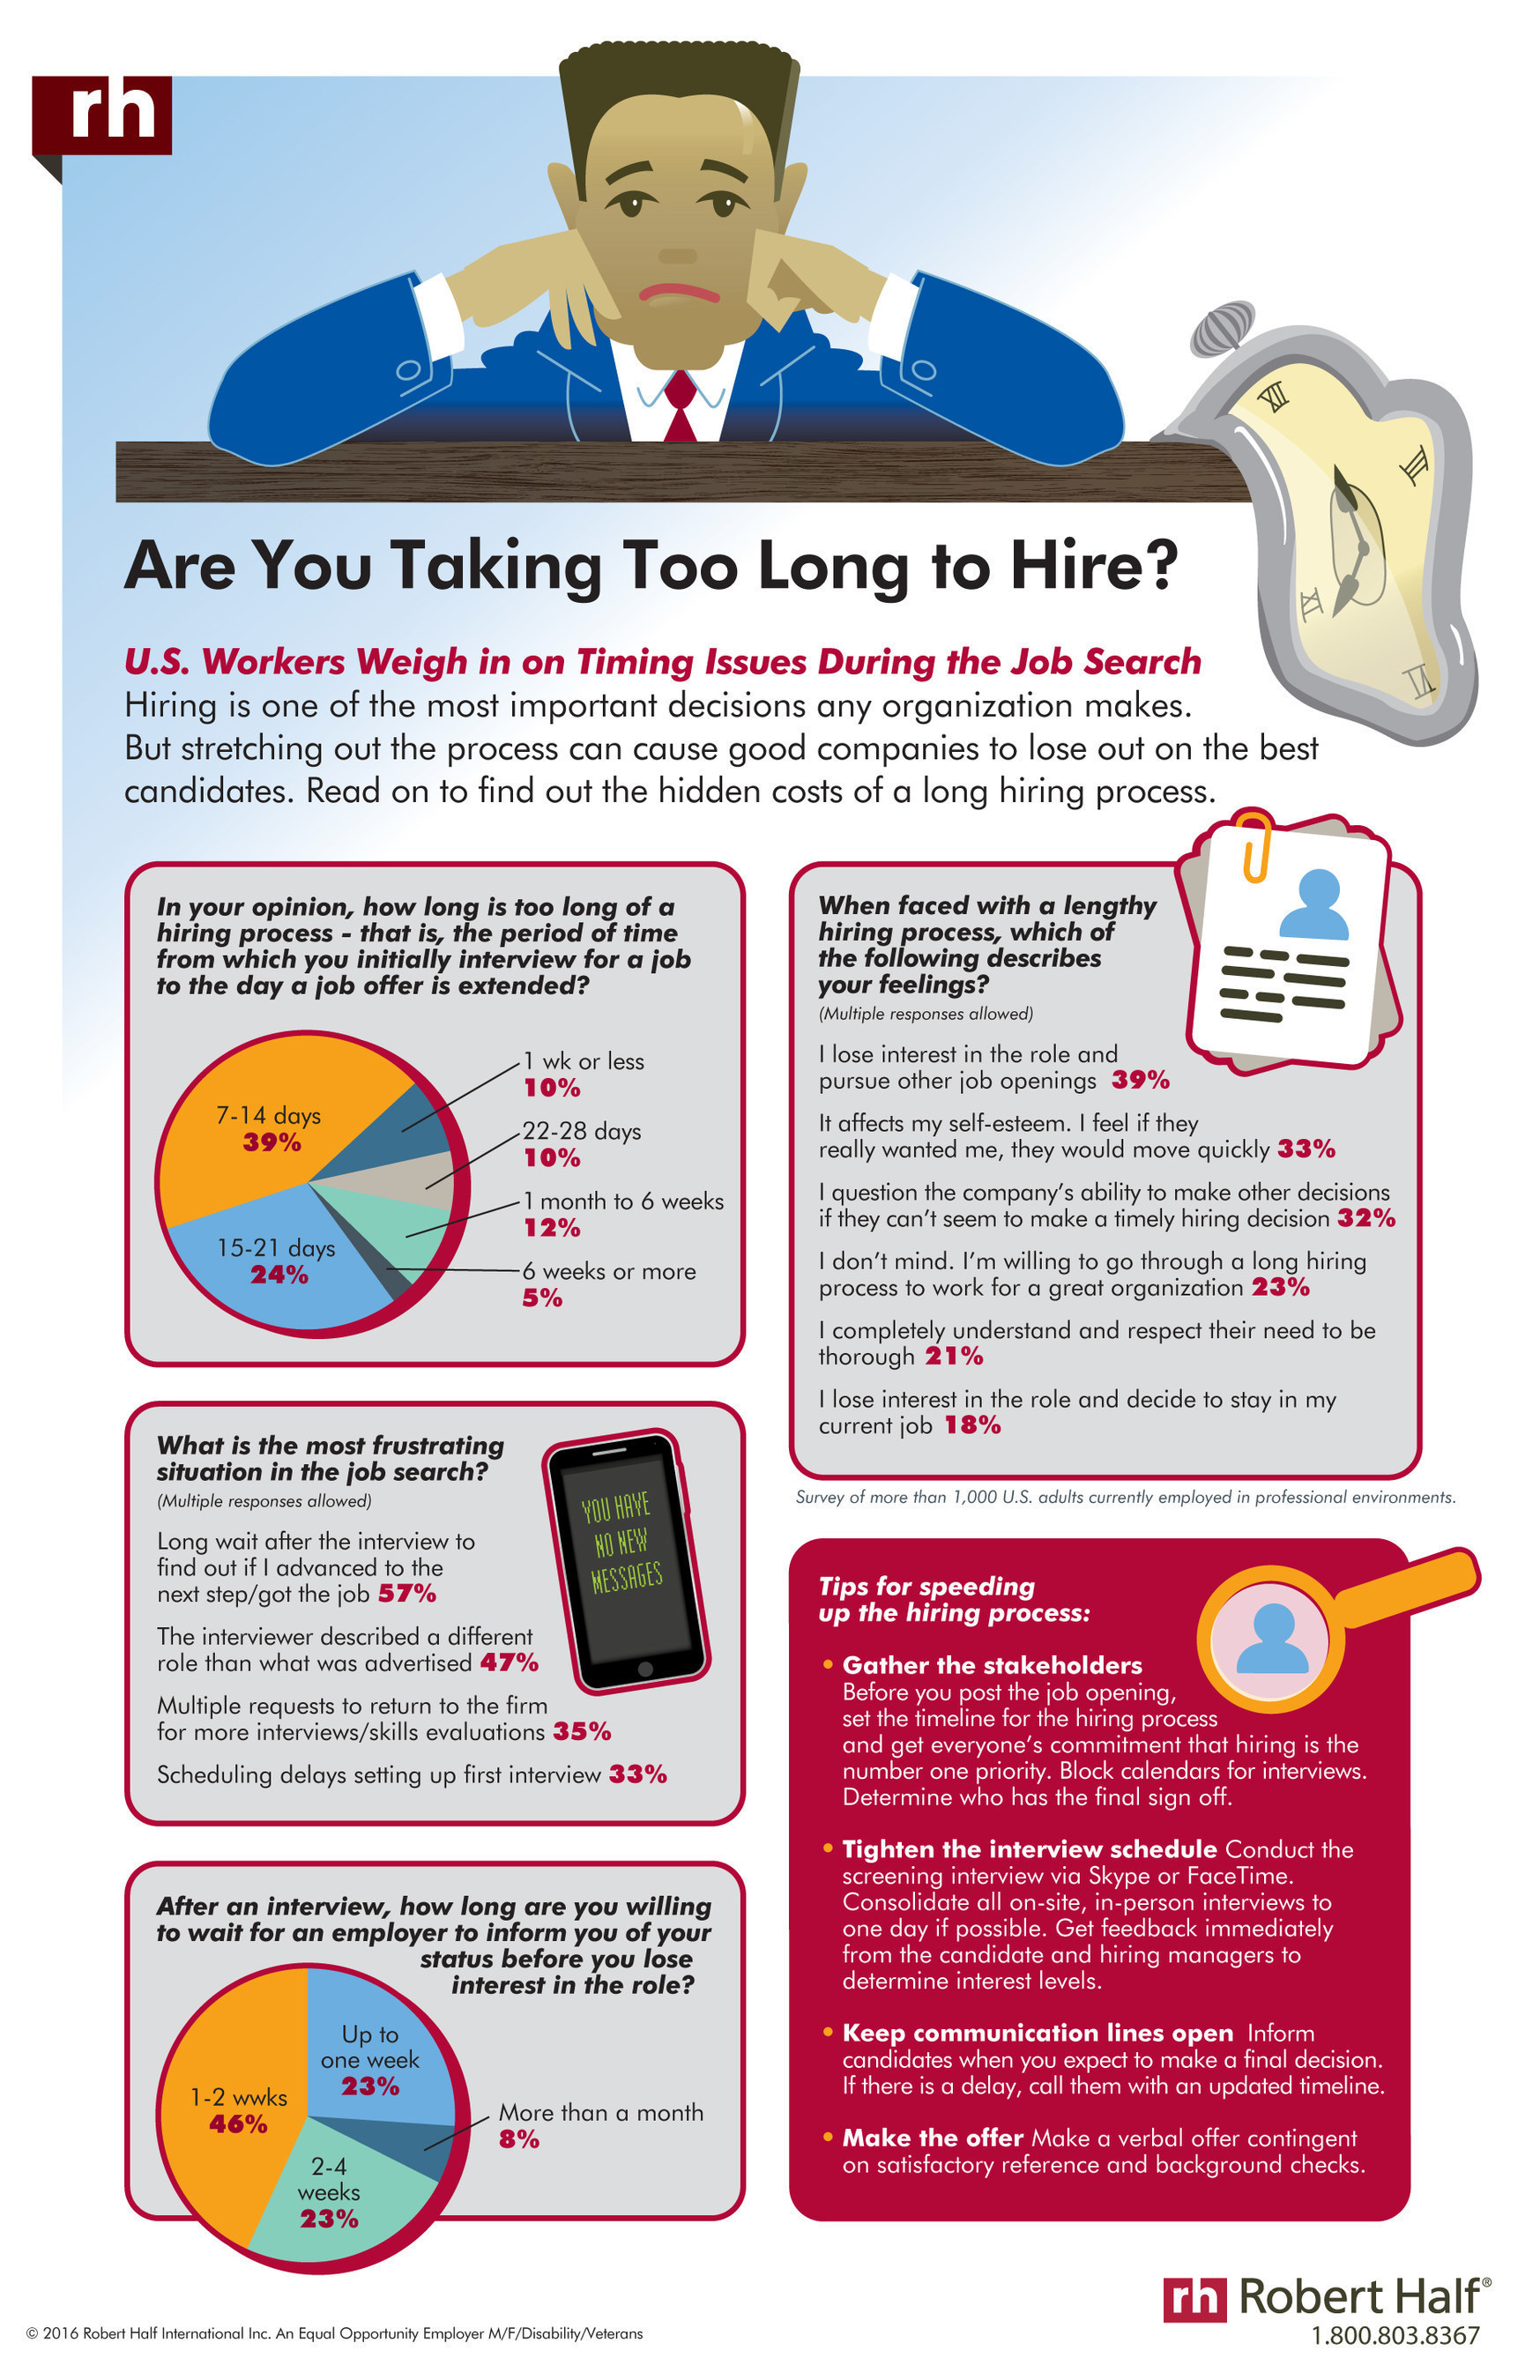 Are you taking too long to hire?